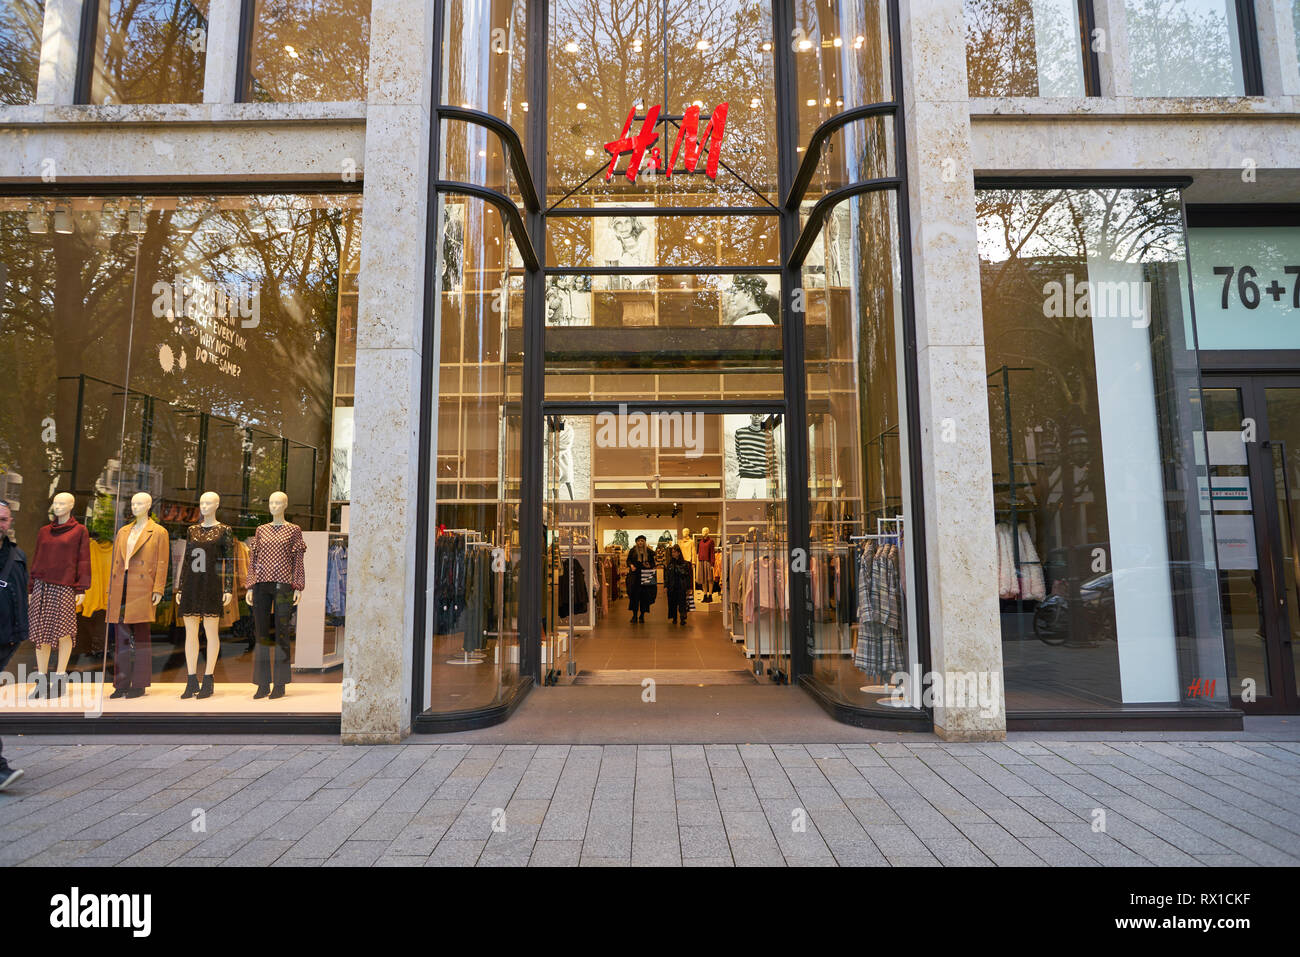 Page 3 - H&m Shop High Resolution Stock Photography and Images - Alamy